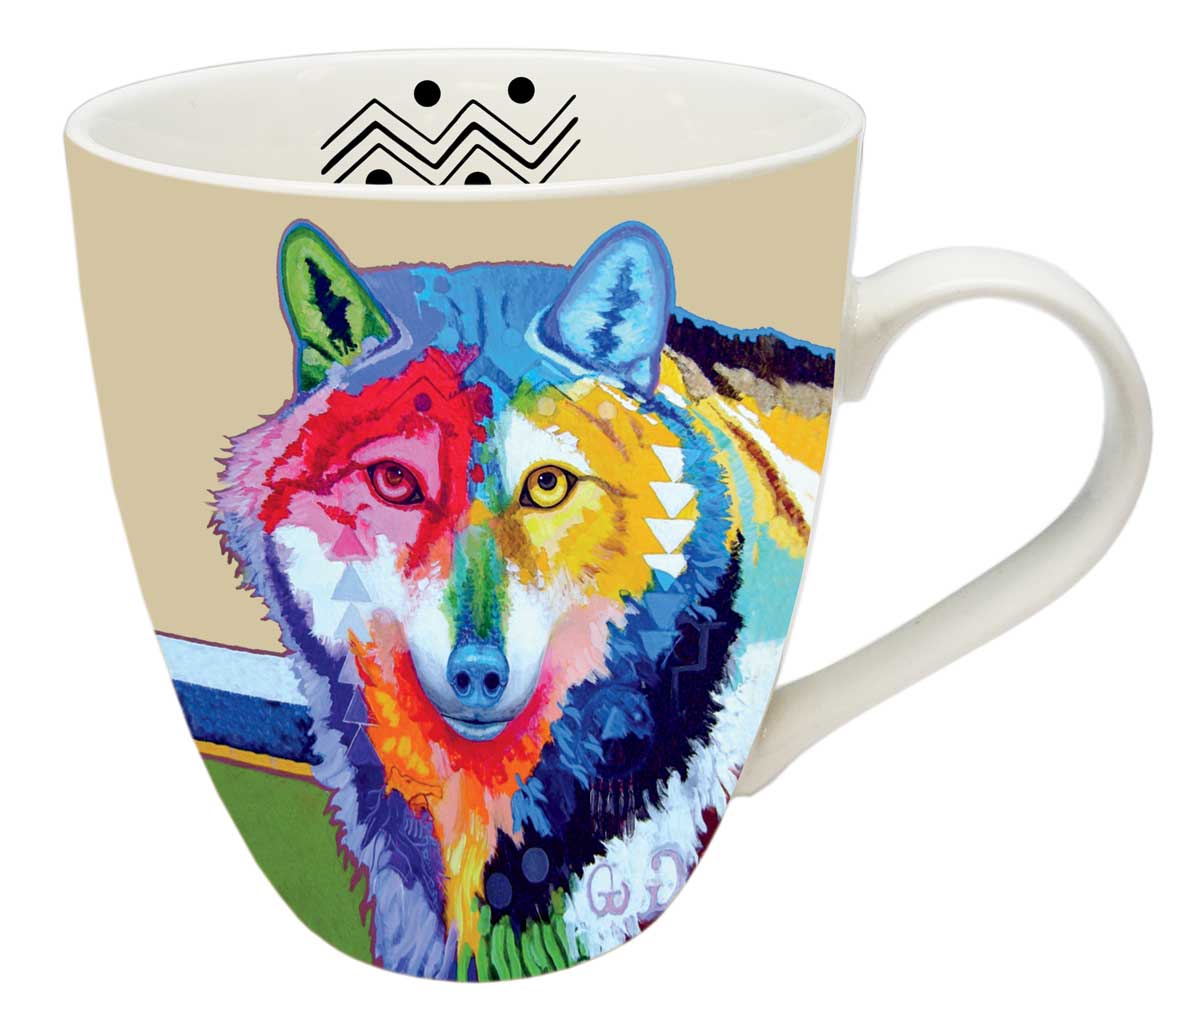 Mug John Balloue Big wolf - Mug John Balloue Big wolf -  - House of Himwitsa Native Art Gallery and Gifts